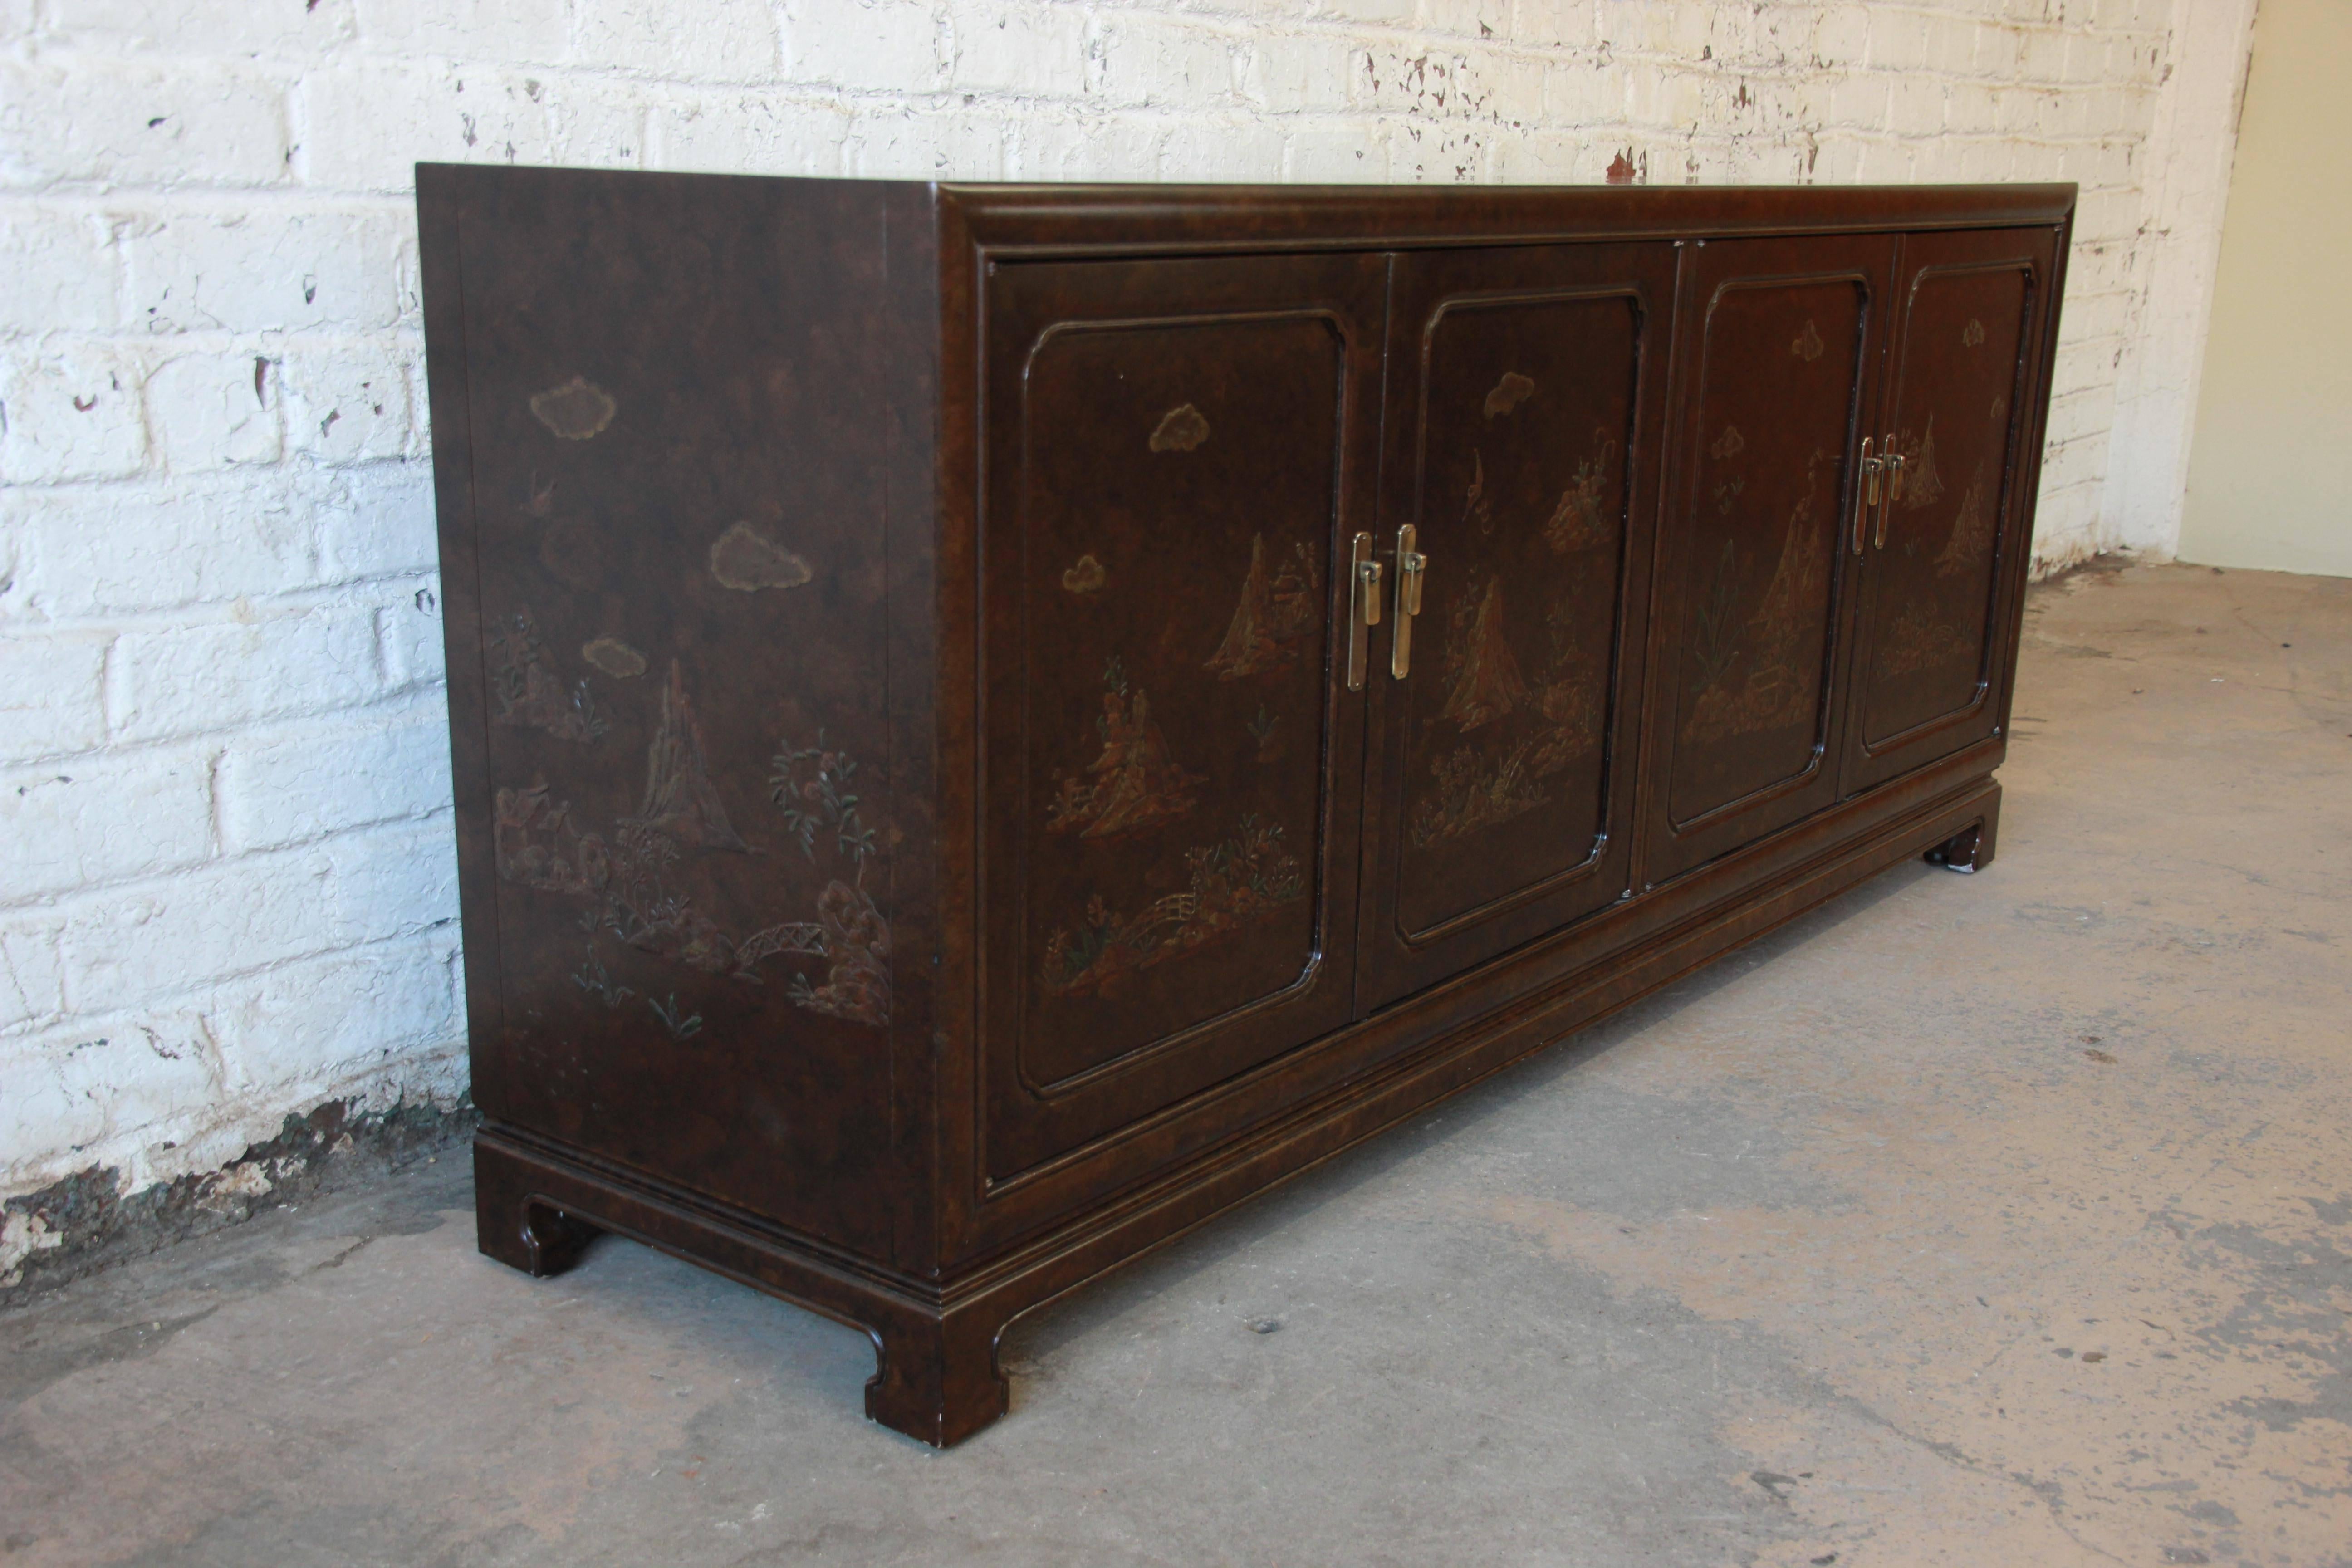 An outstanding custom chinoiserie sideboard buffet designed in 1980 by Mario Buatta for John Widdicomb. The sideboard features a beautiful faux tortoise shell finish and ornate carved landscape scenes on the front and sides of the cabinet. It offers